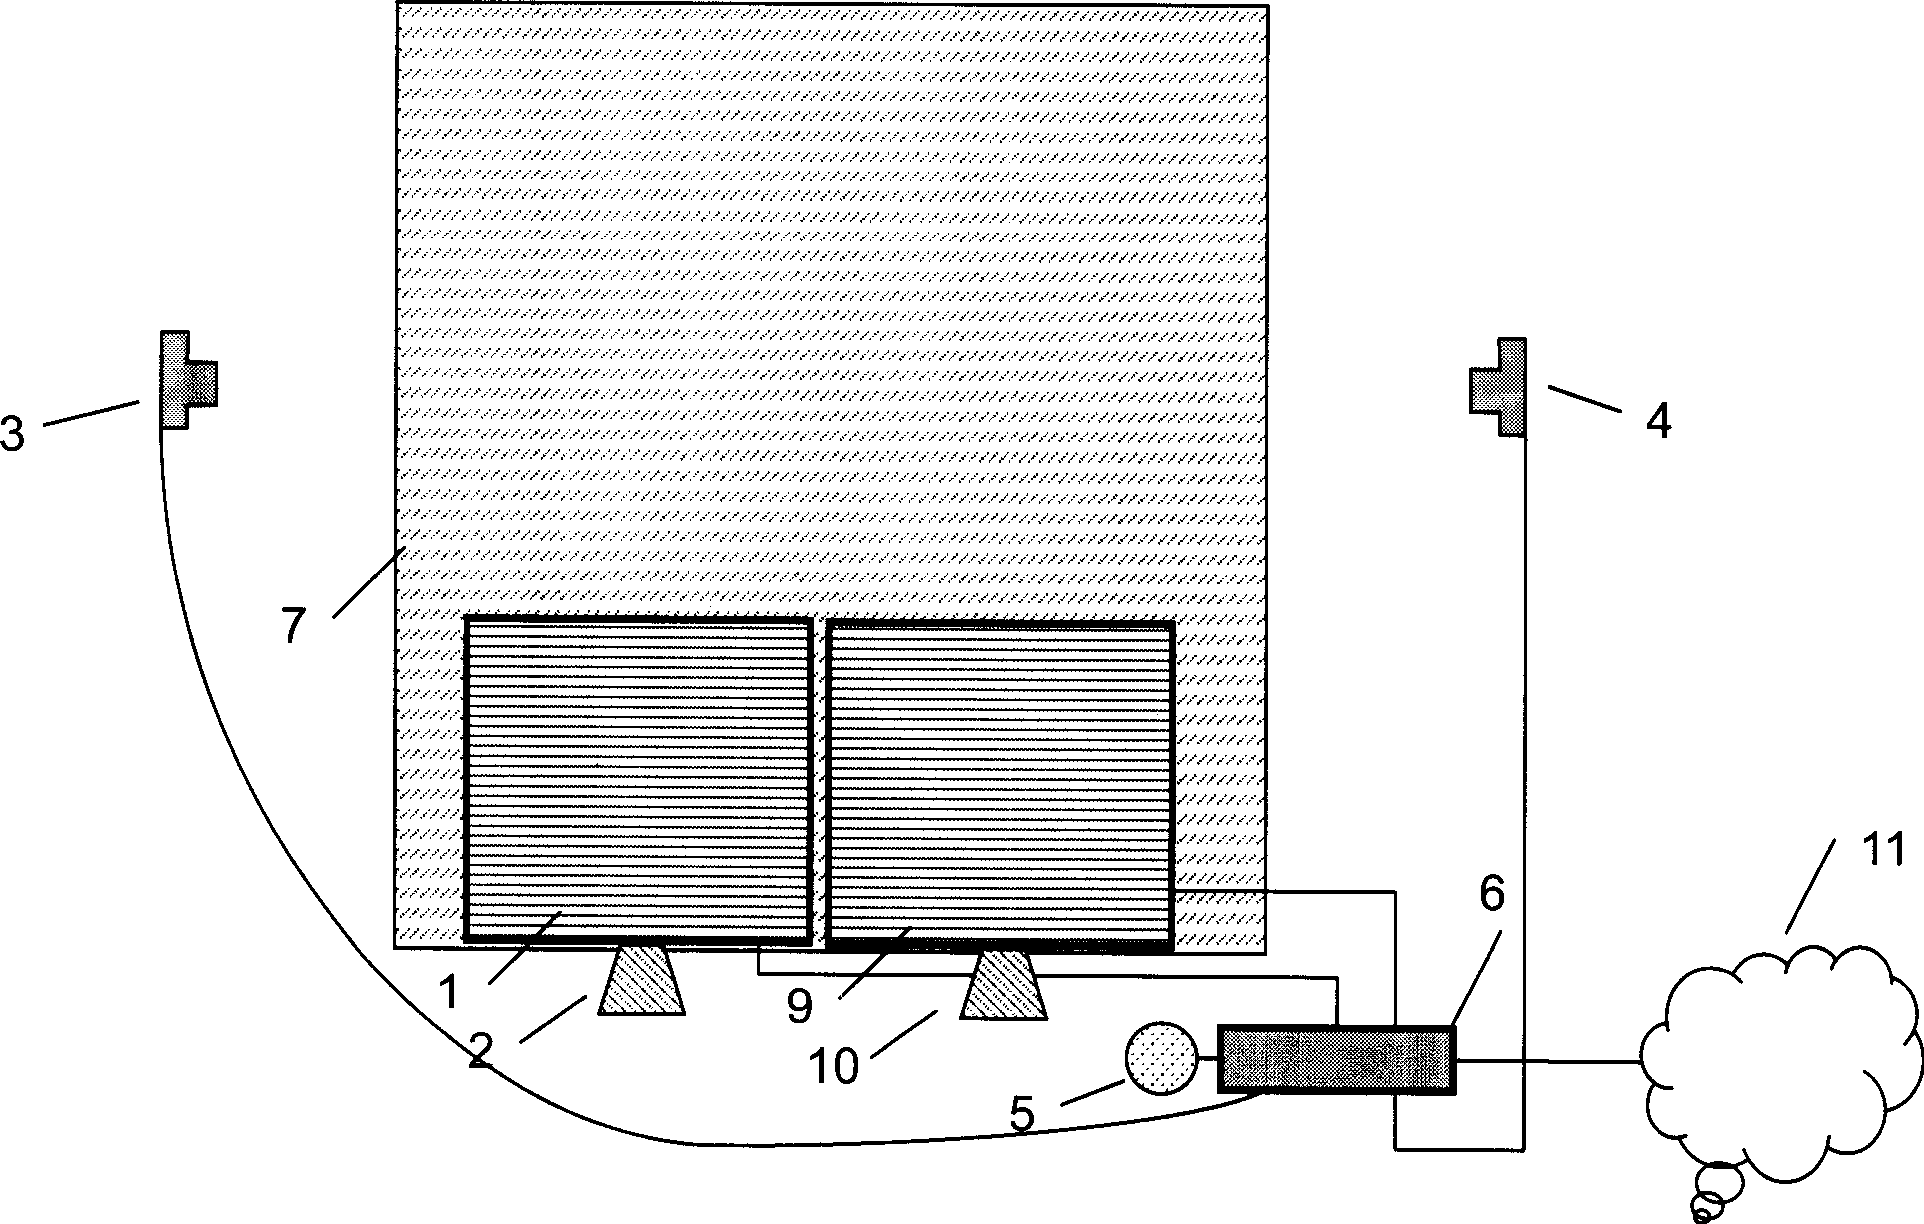 Video image system and uses thereof